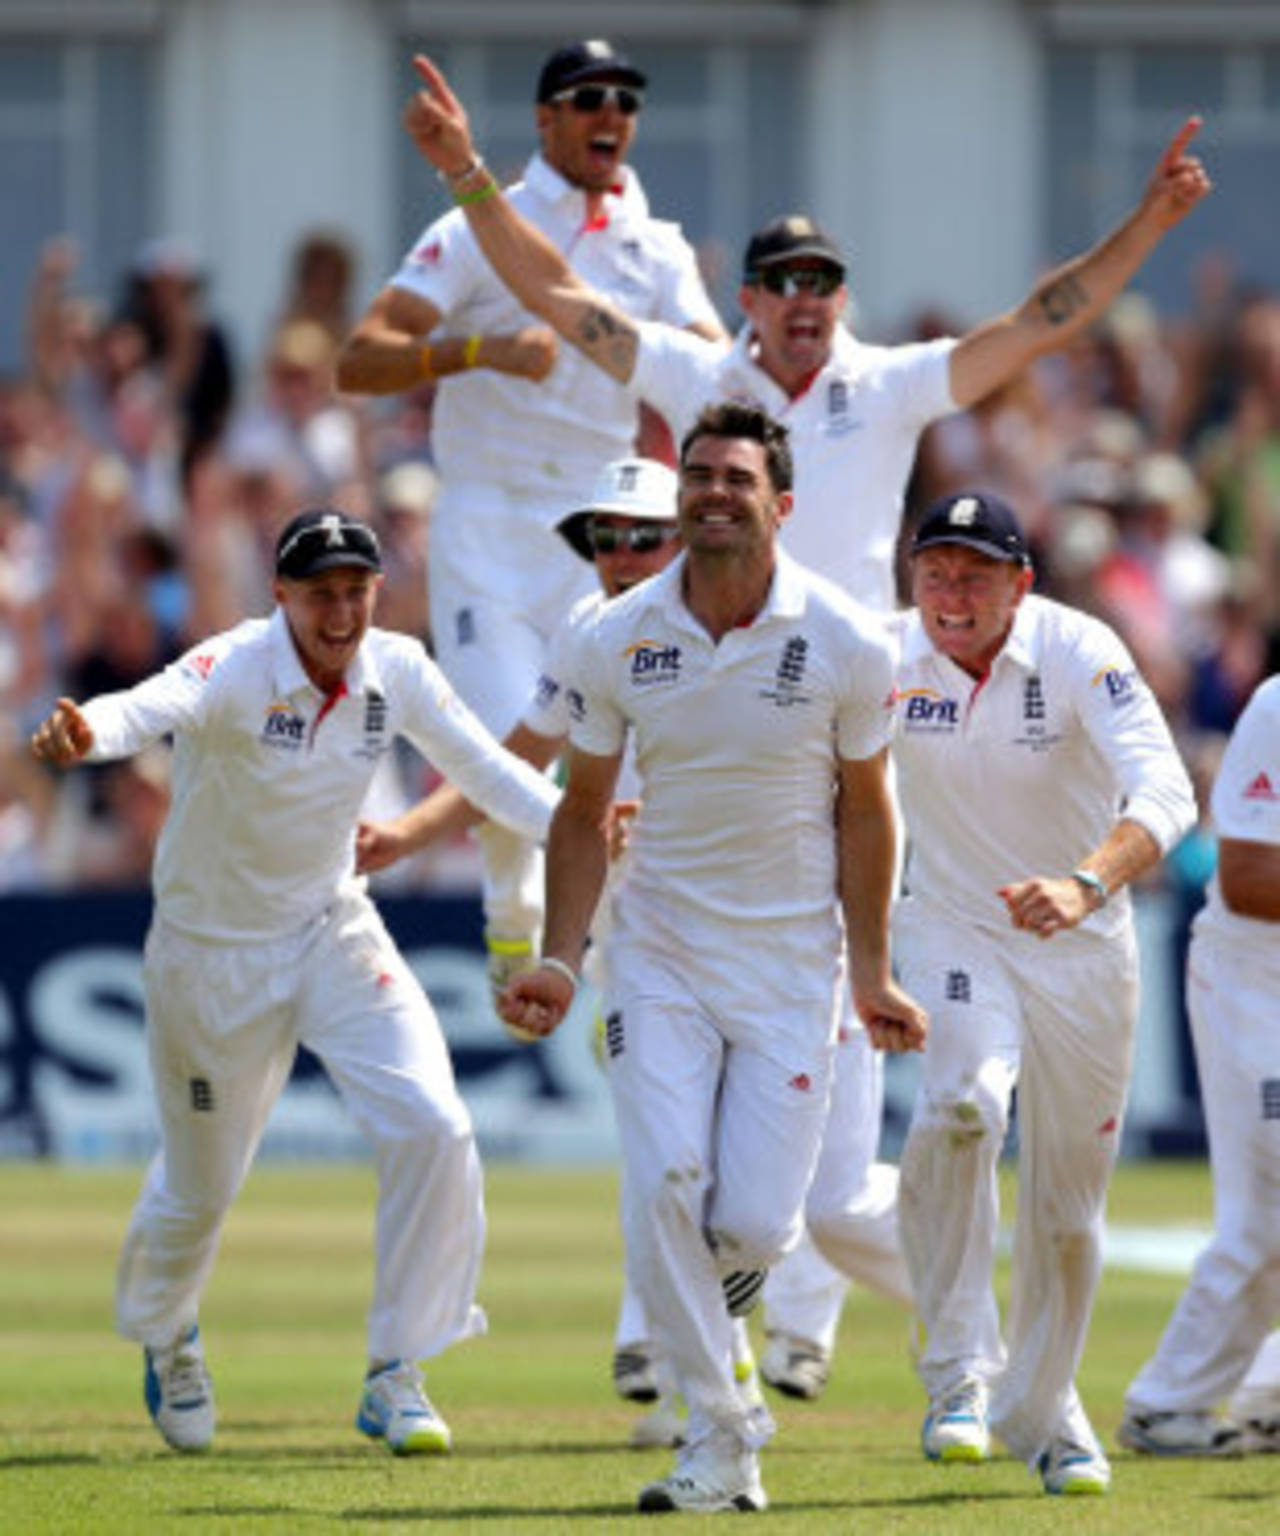 England erupt as victory is confirmed, England v Australia, 1st Investec Test, Trent Bridge, 5th day, July 14, 2013